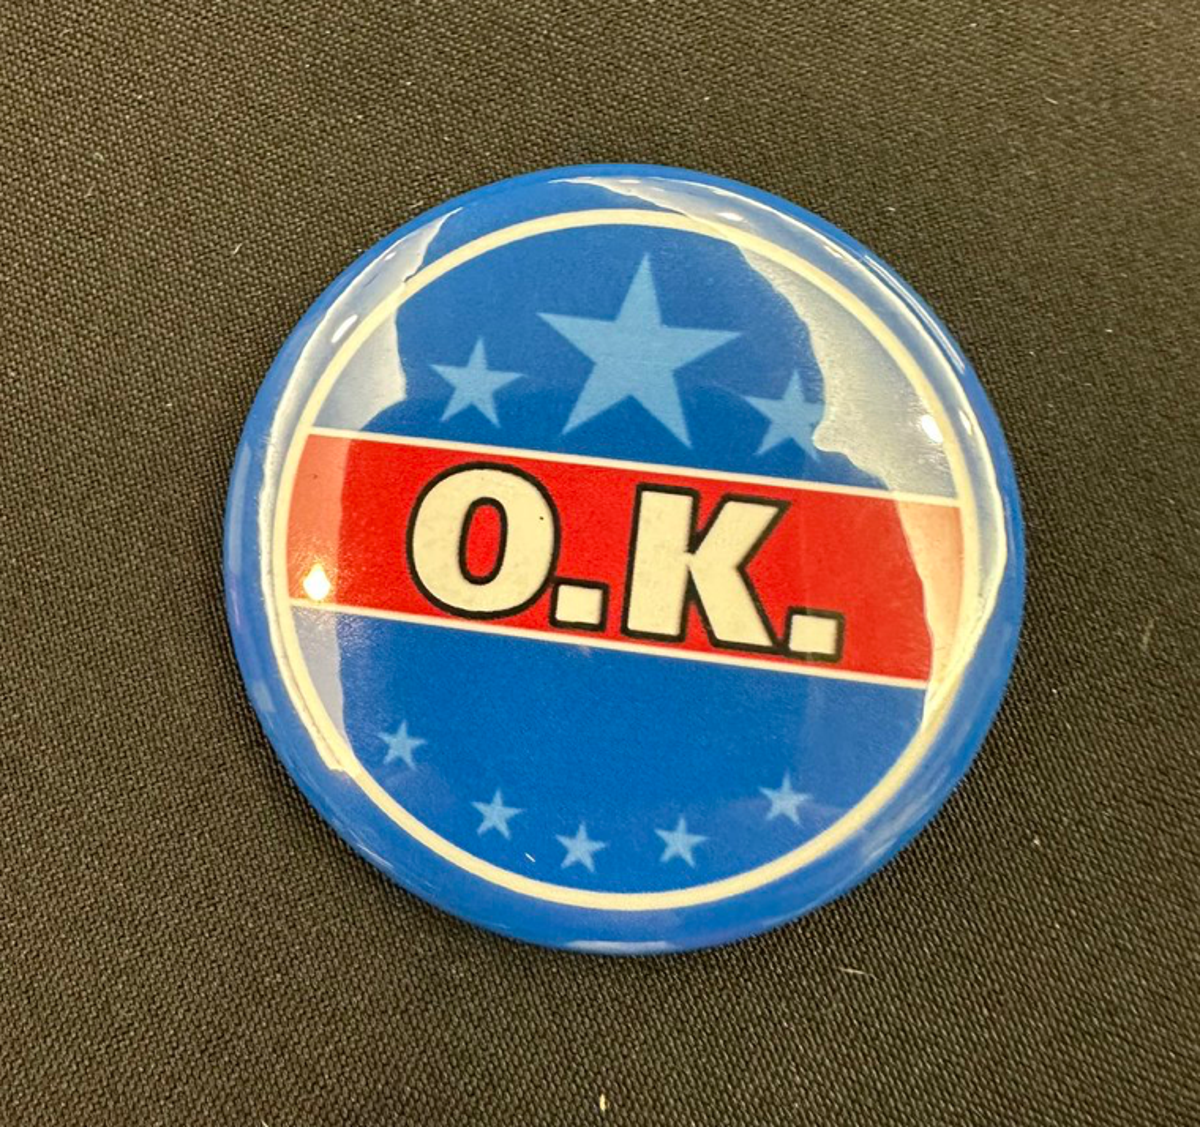 Kevin McCarthy mocked for ‘OK’ buttons meant to boost his campaign to become House Speaker